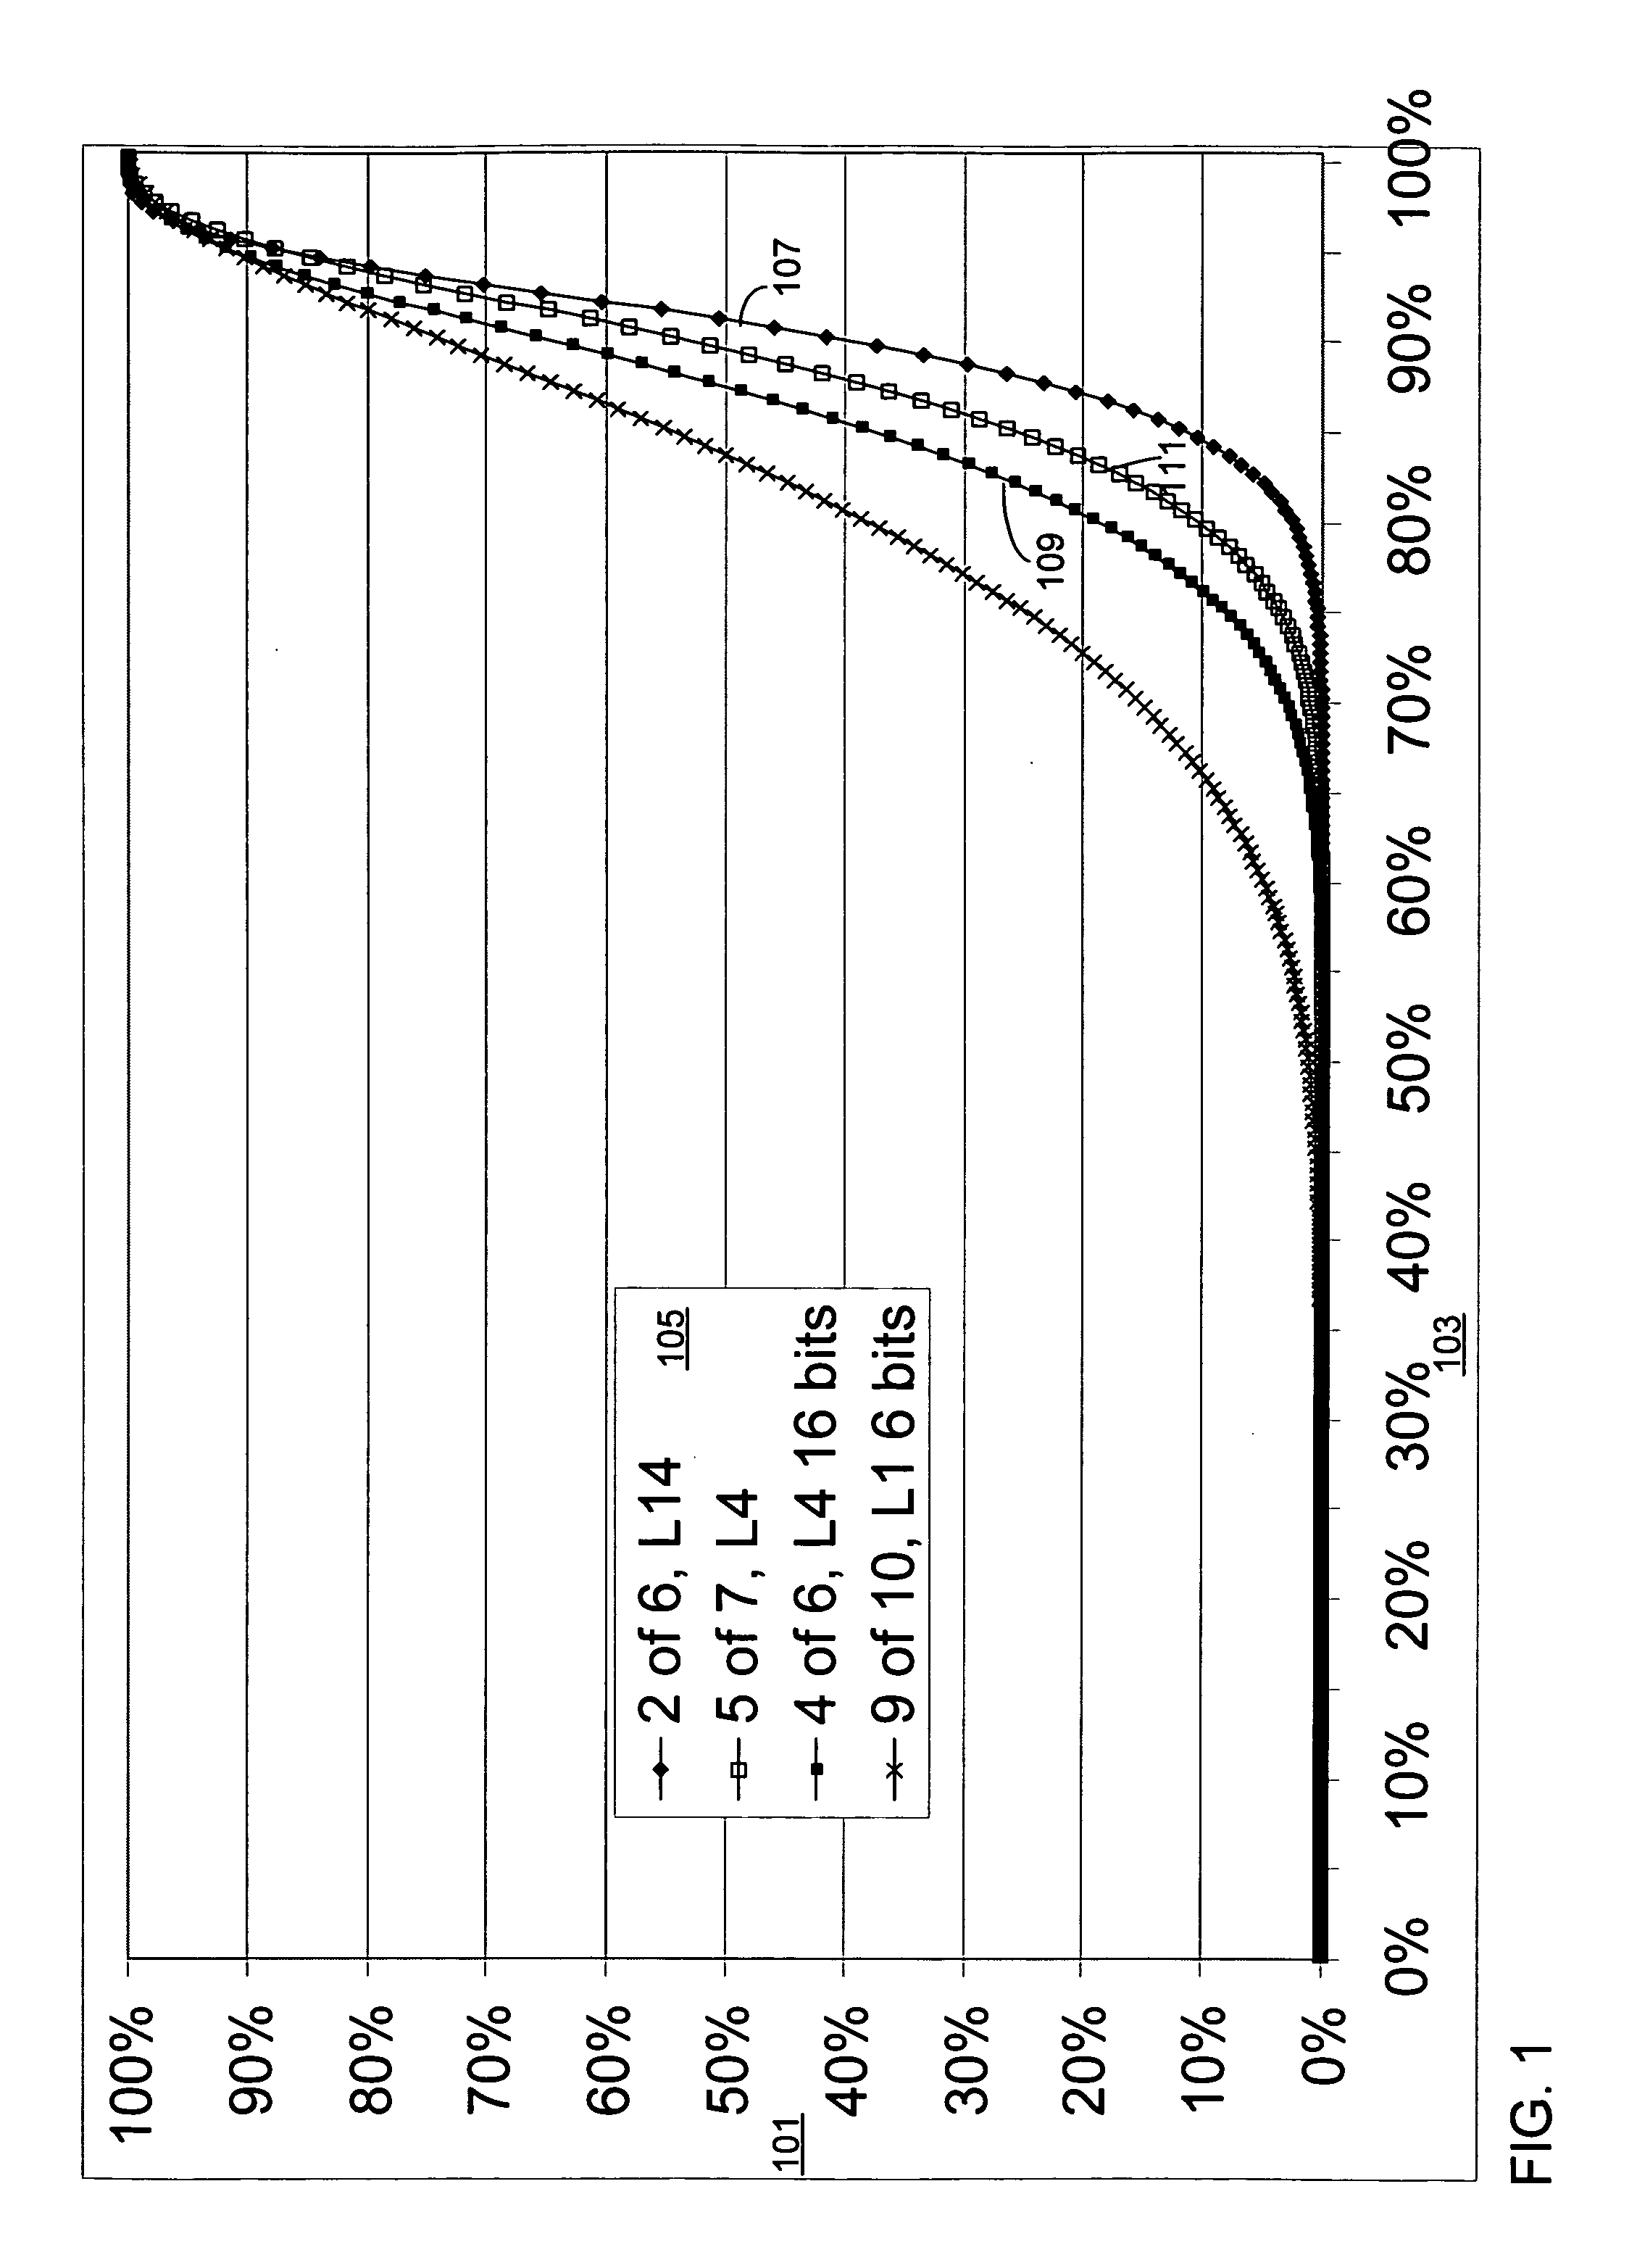 Method for duplicate detection and suppression